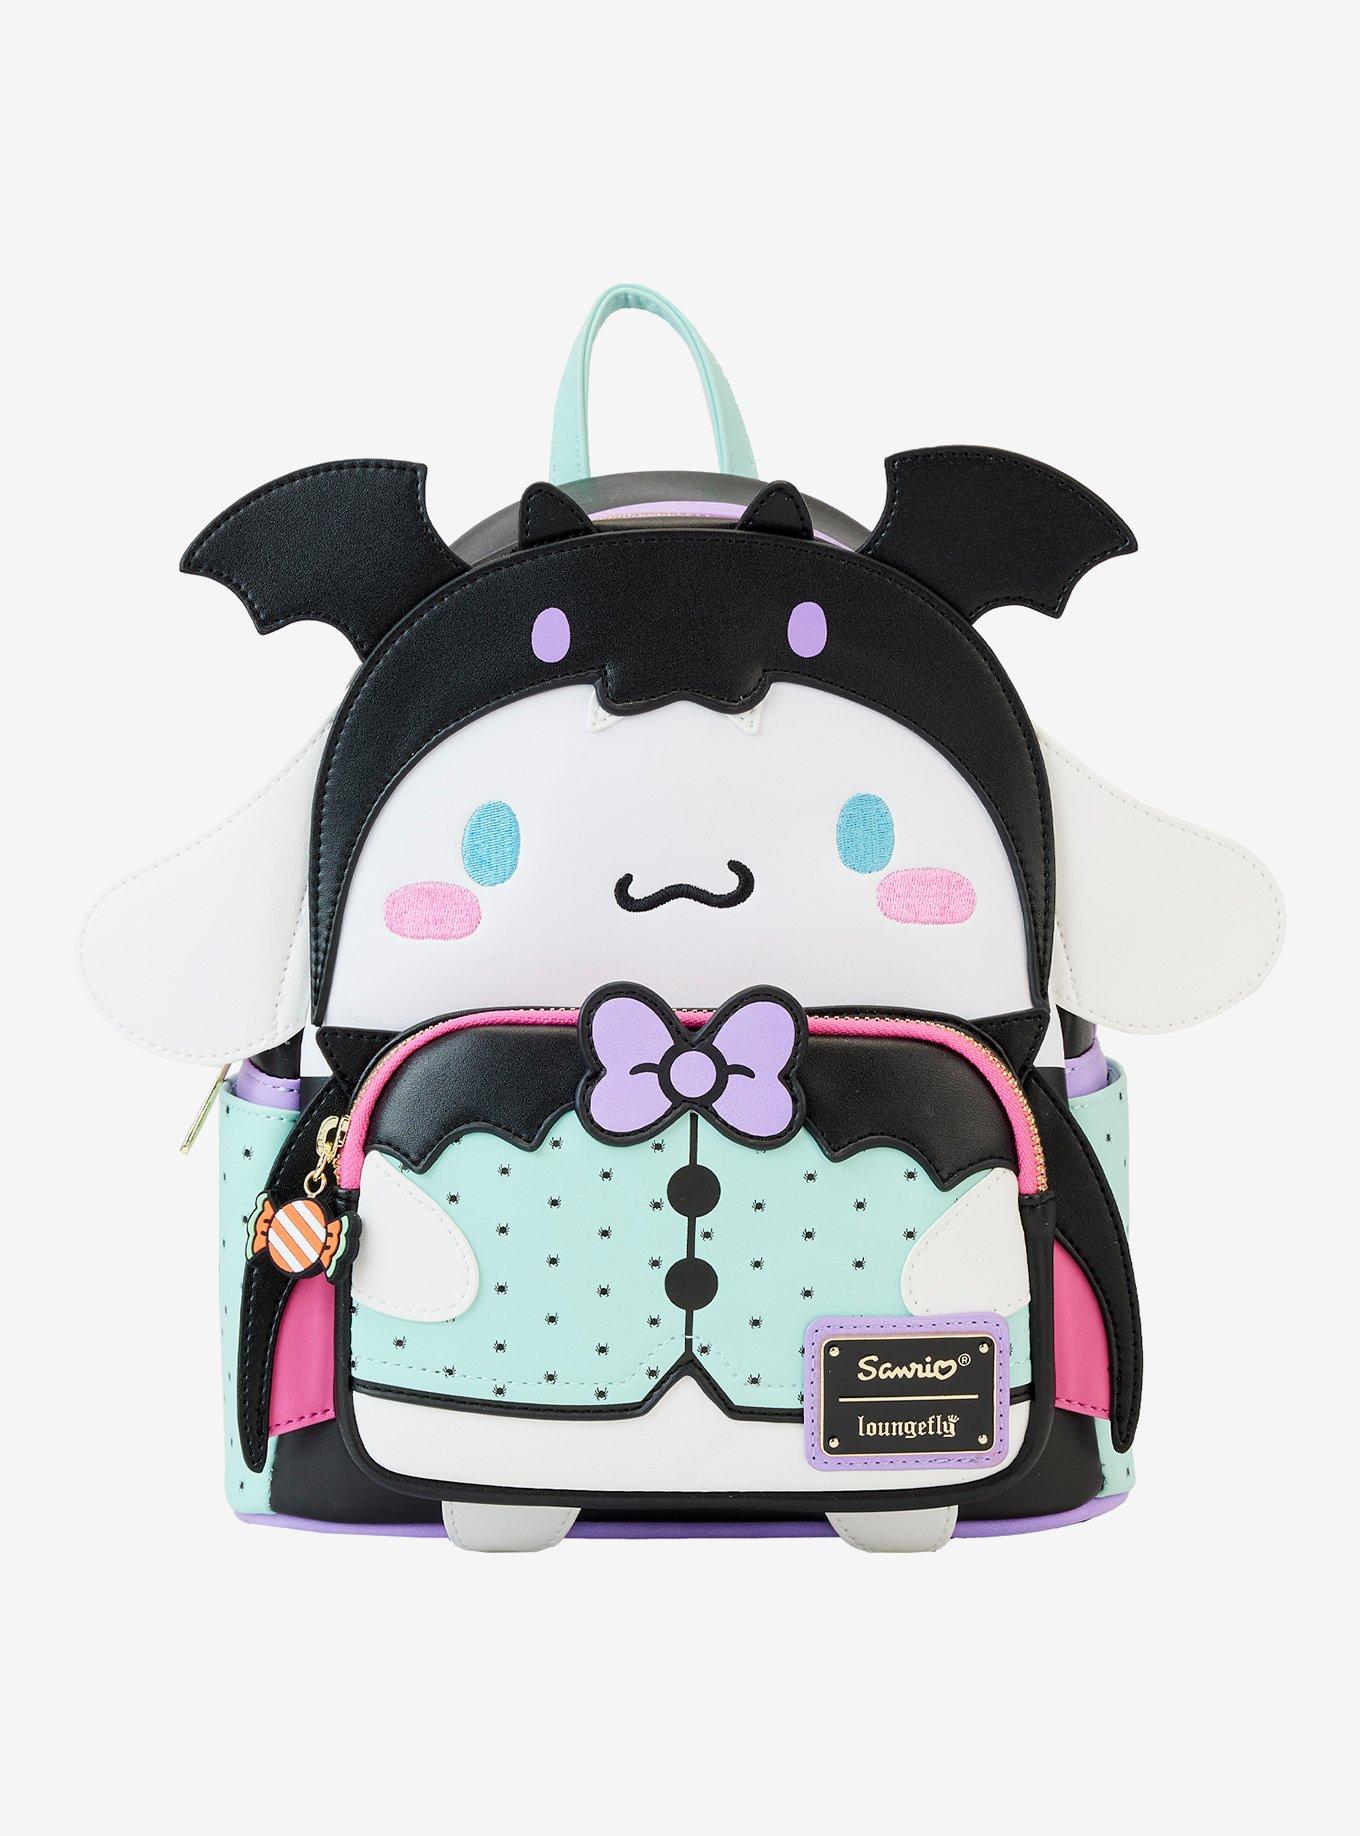 Sanrio Loungefly Mini Backpack - Exclusive Hello Kitty Witch Cosplay